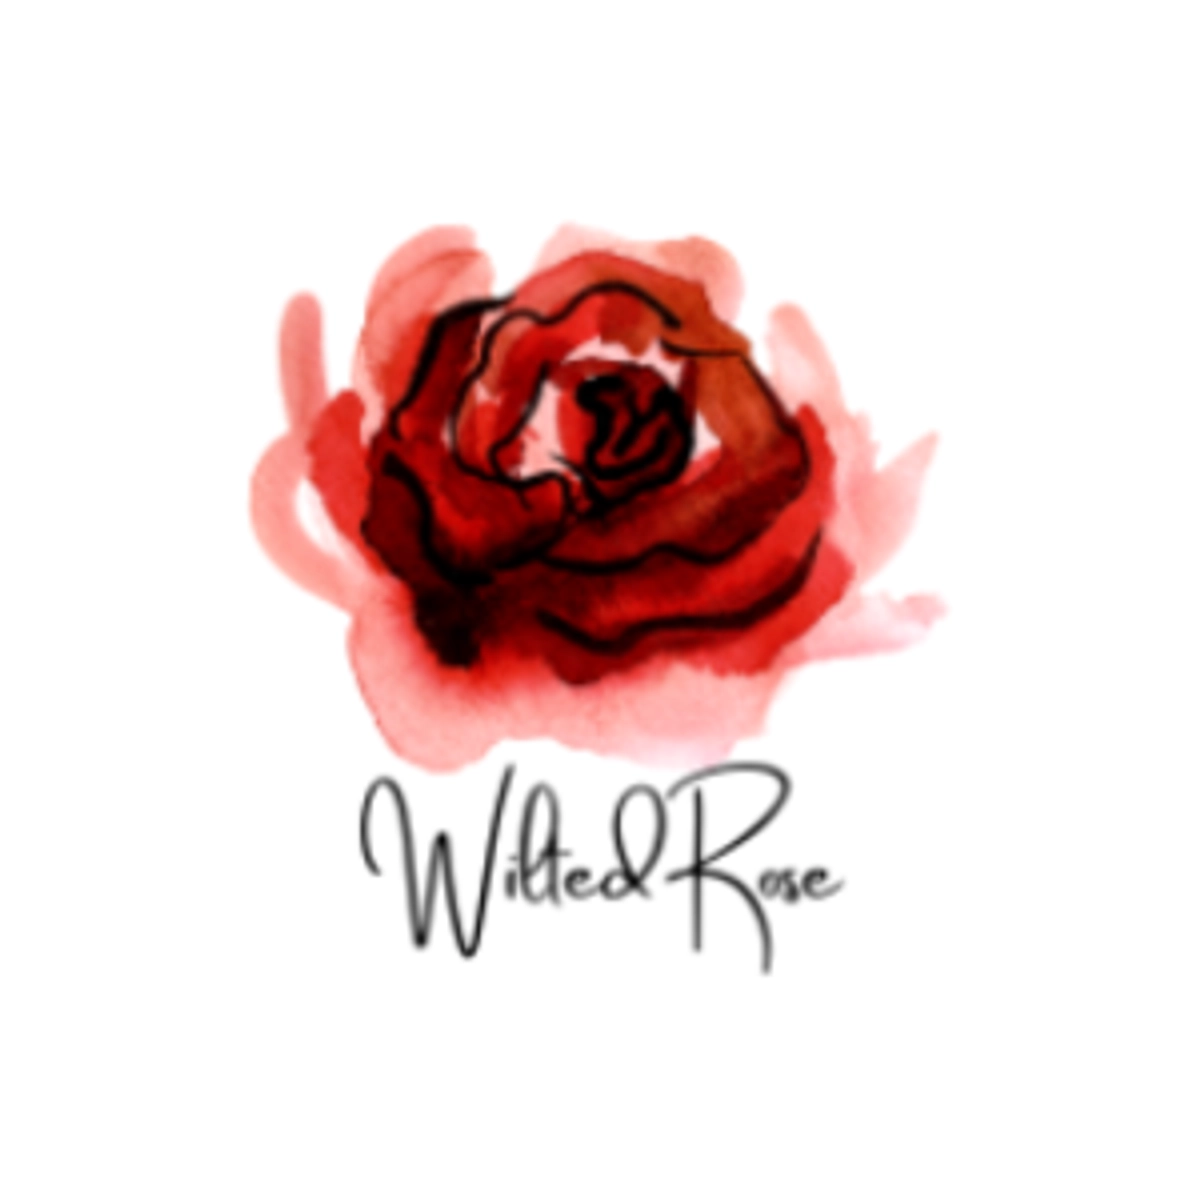 wilted69rose